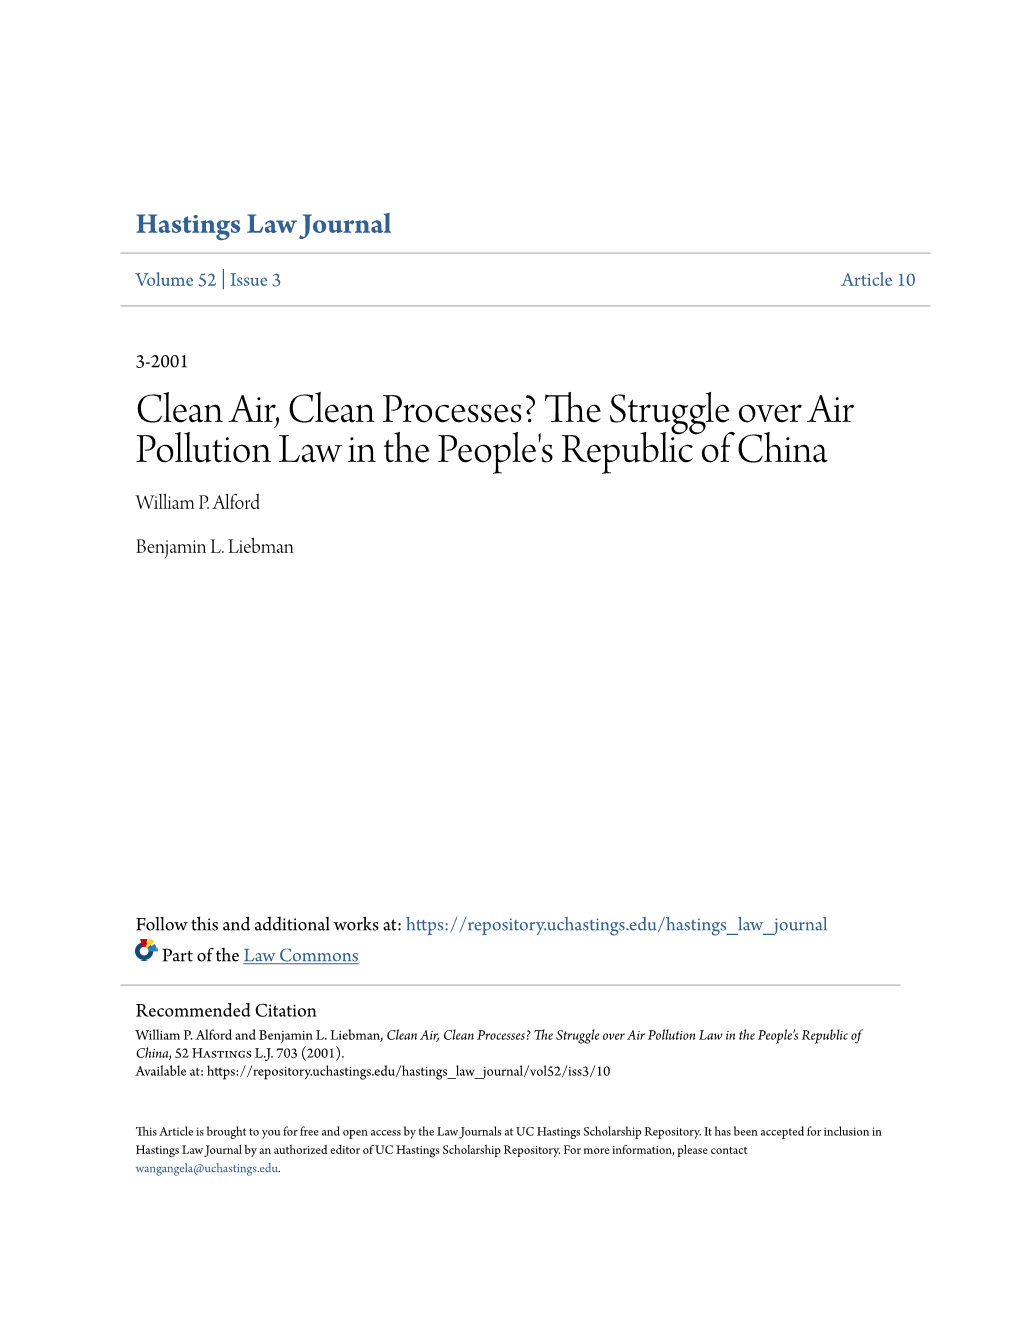 The Struggle Over Air Pollution Law in the People's Republic of China, 52 Hastings L.J